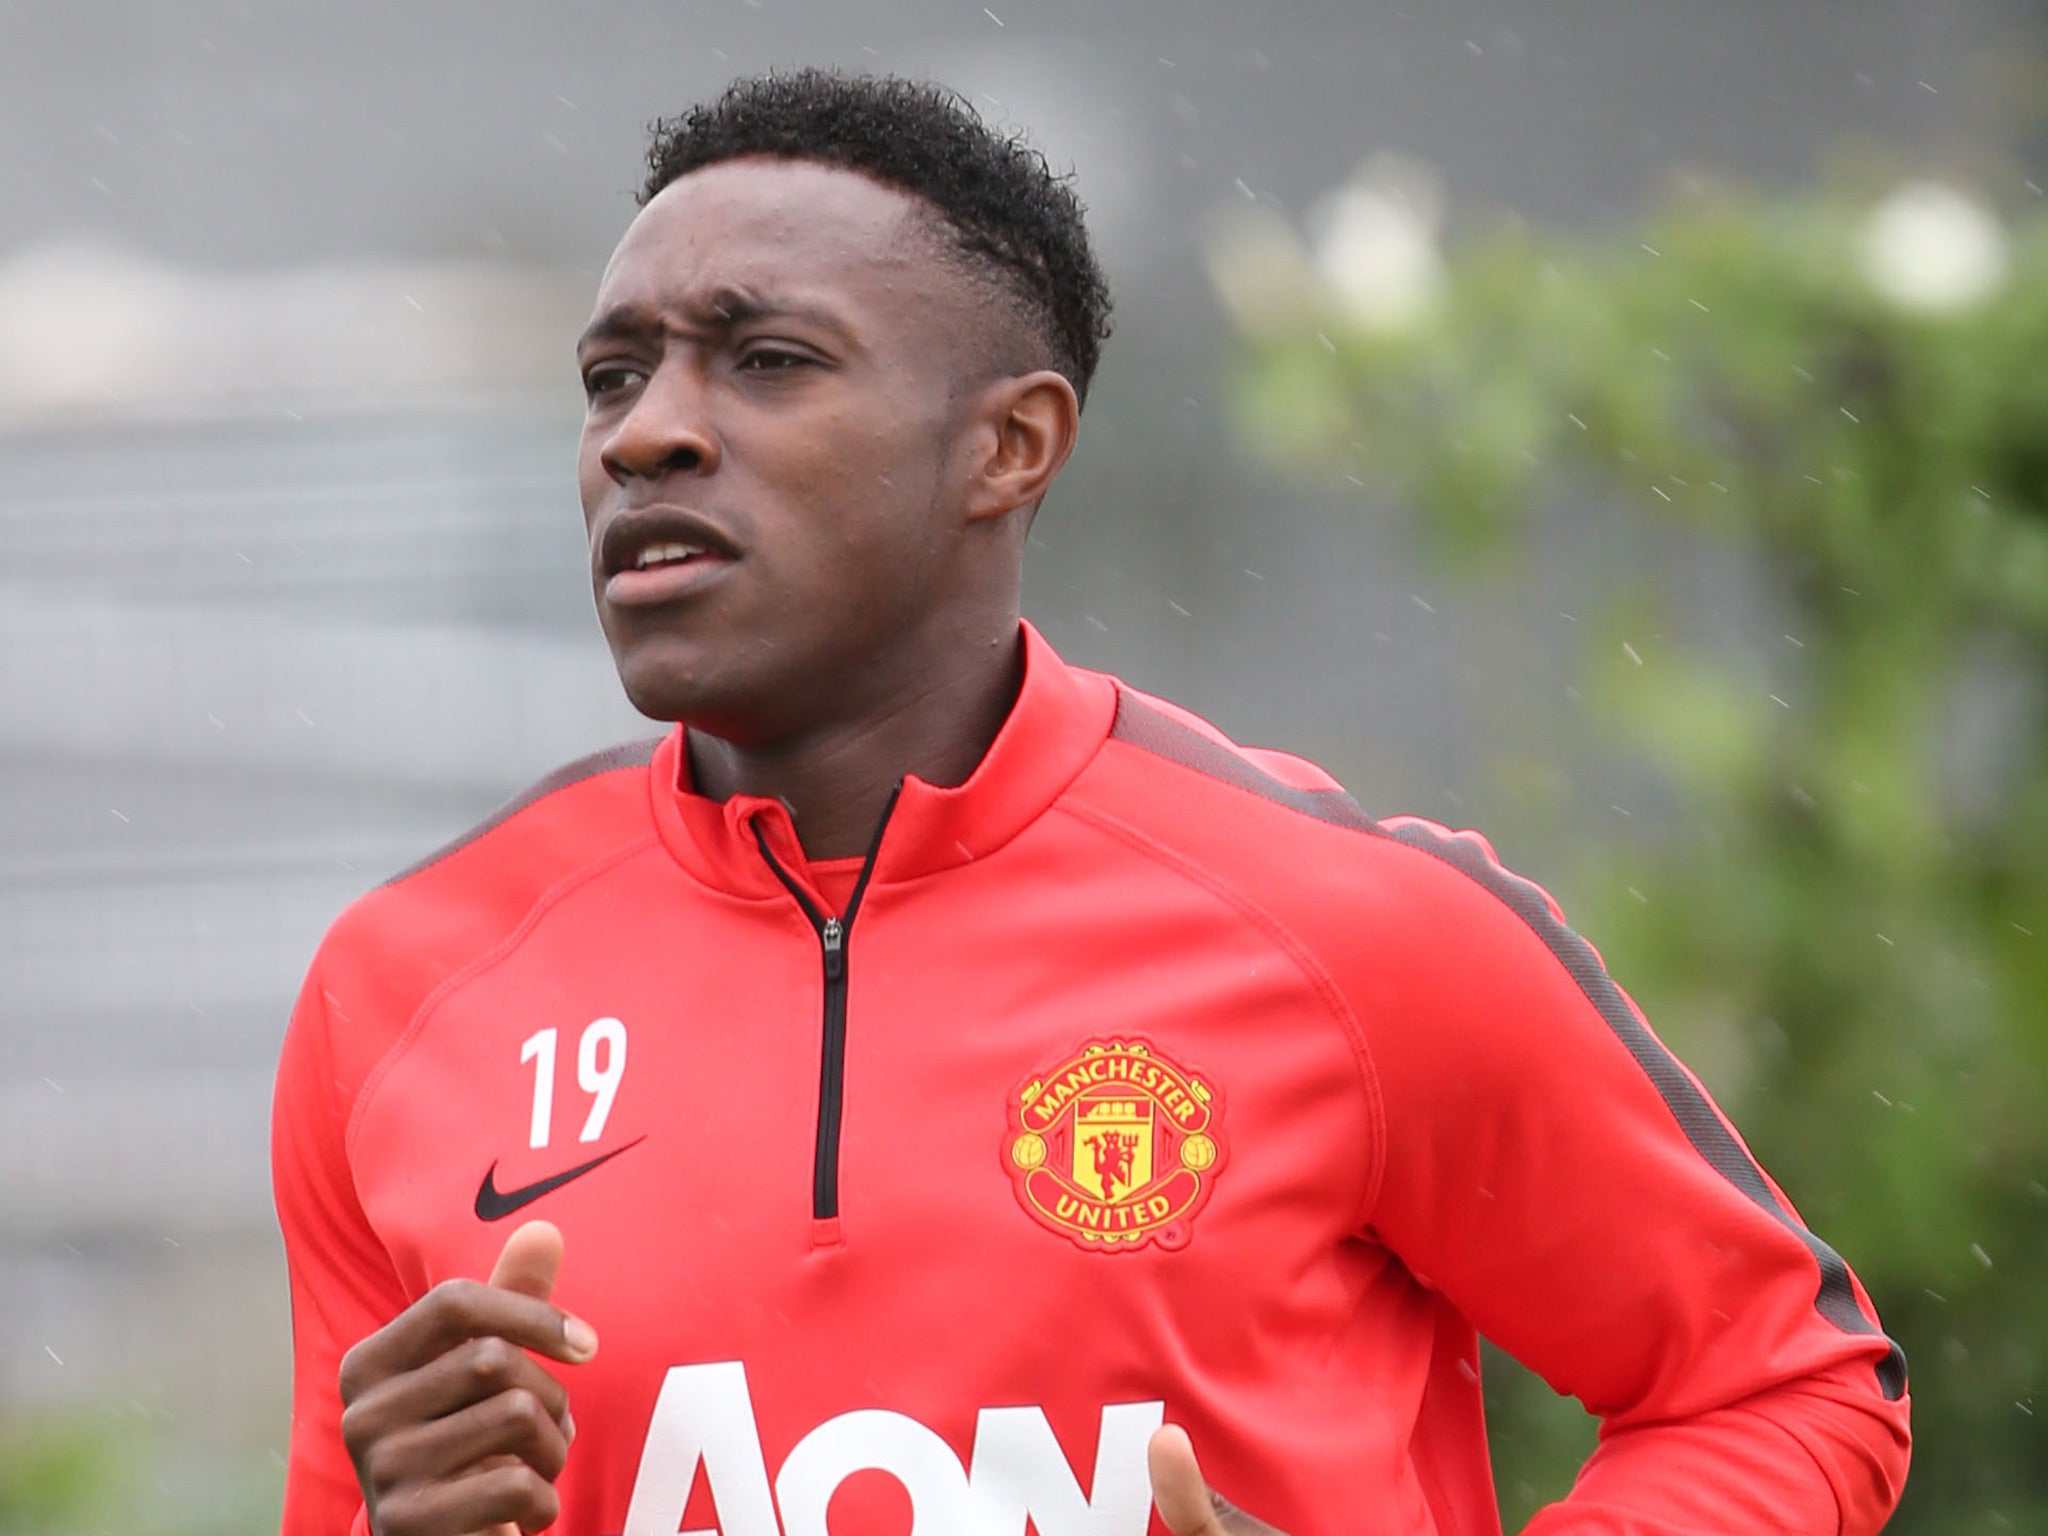 Danny Welbeck came through the United academy, only to be sold to rivals Arsenal